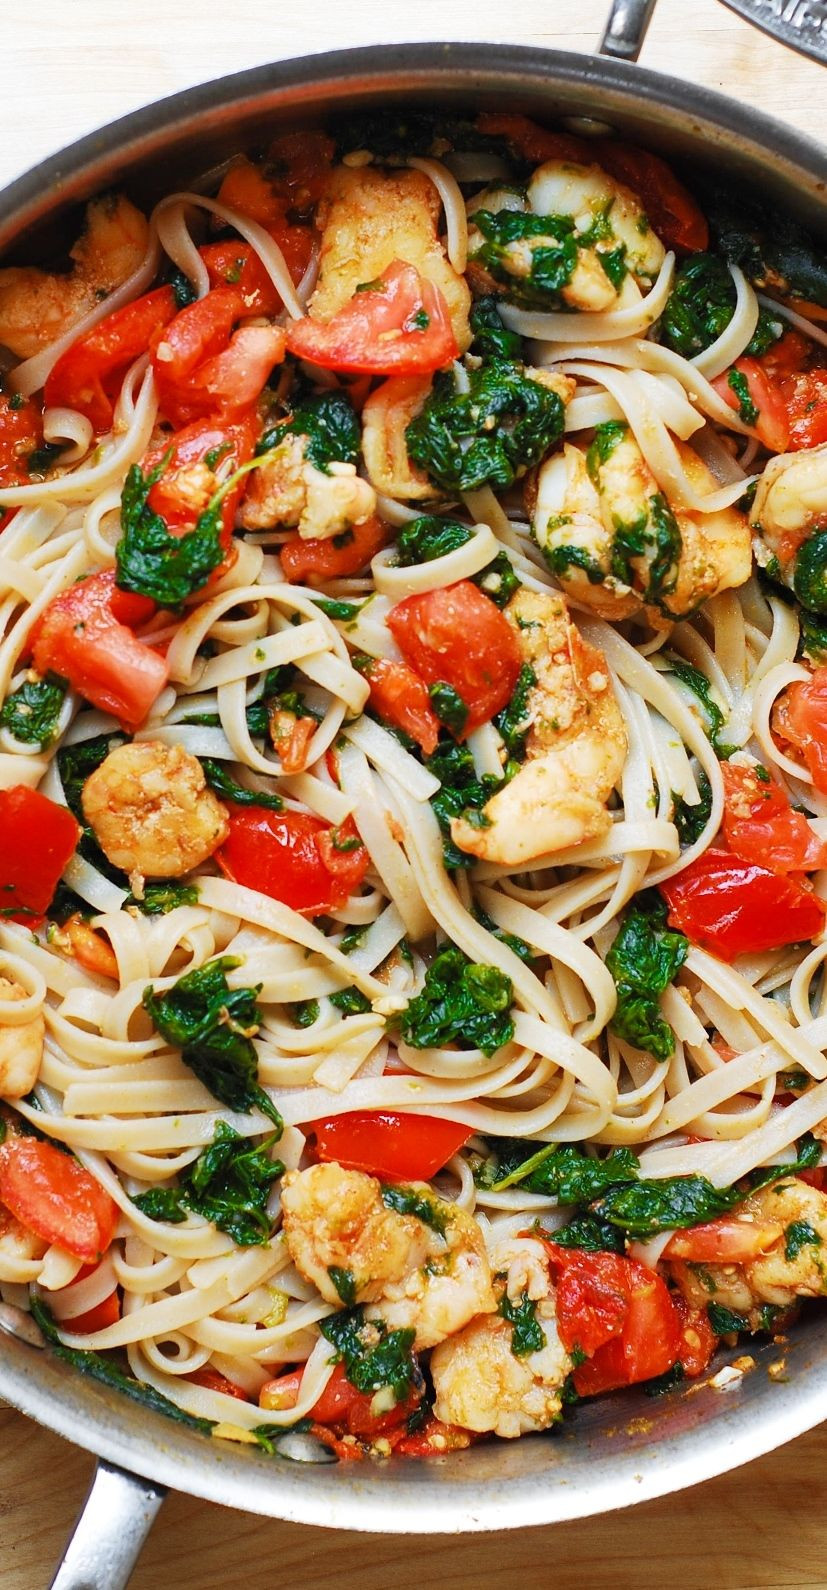 Shrimp Spinach Pasta Recipes
 Shrimp pasta with fresh tomatoes and spinach in a garlic